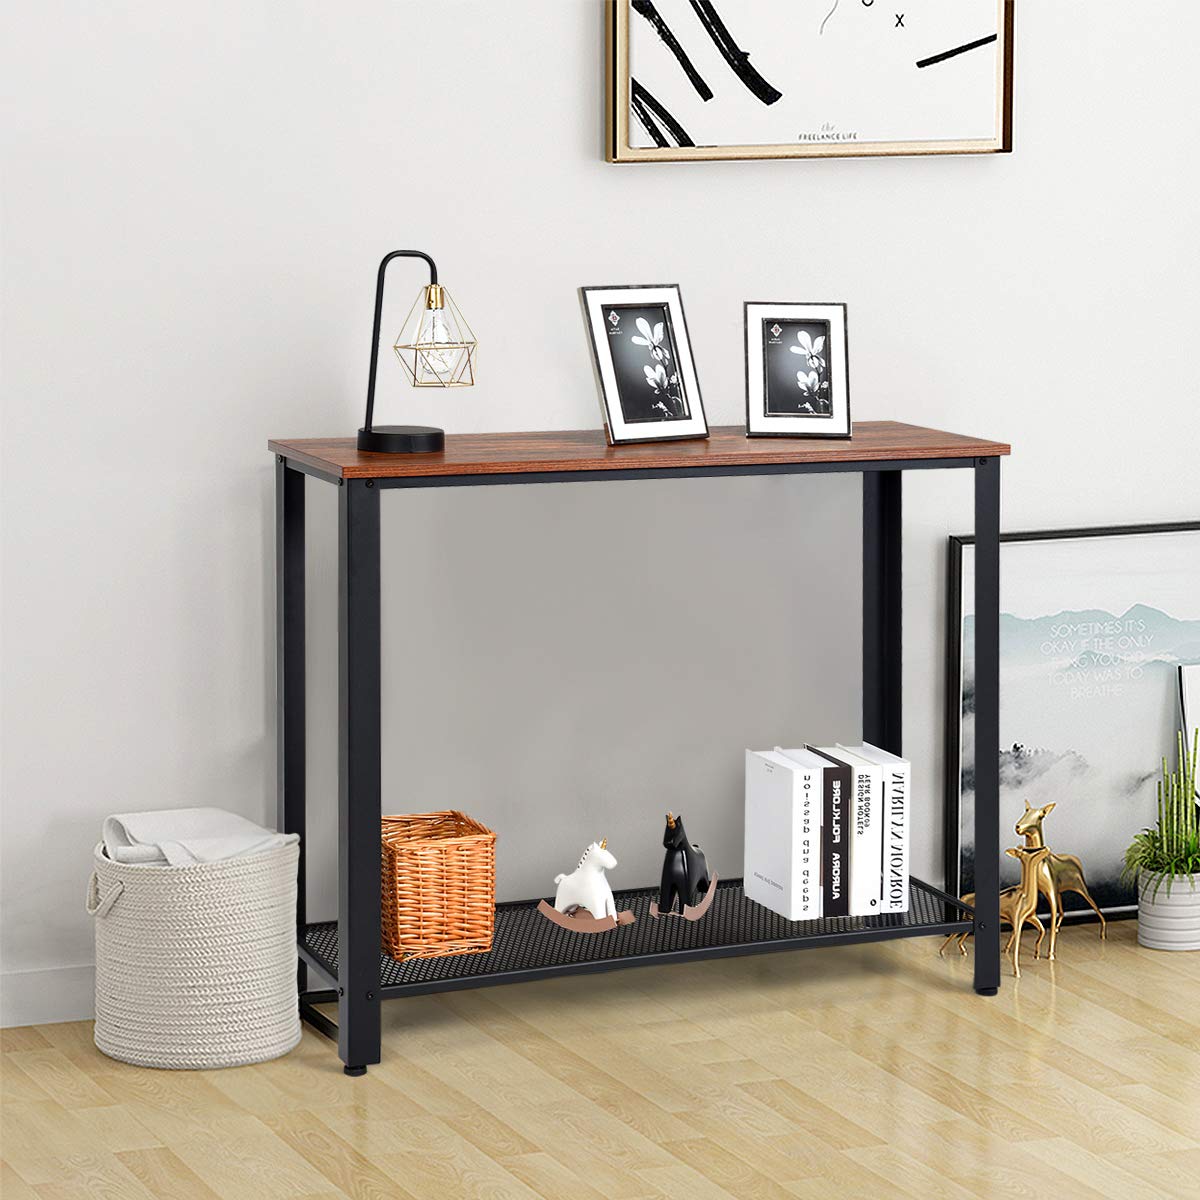 Giantex Console Table with 2 Levels, Hallway Table with Non-Slip Adjustable Foot Pads, Side Table with Grid Shelf